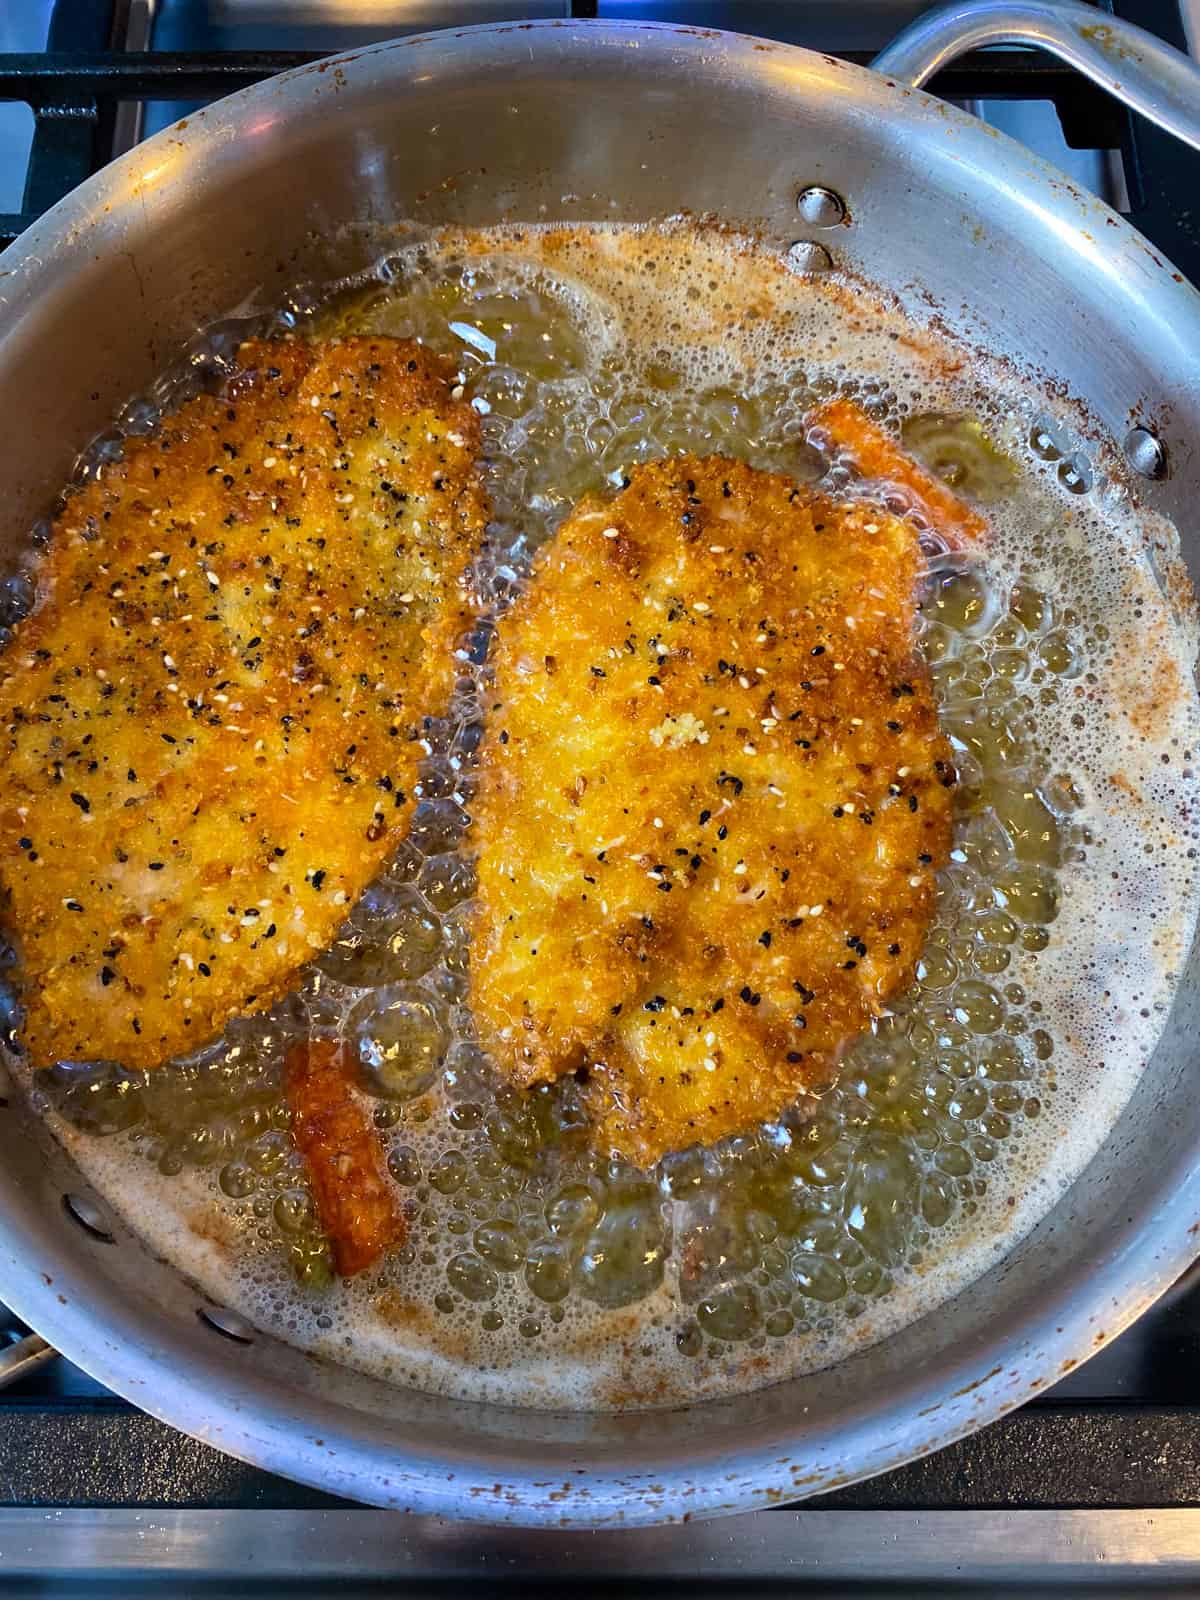 Turn the chicken cutlets over and fry on the other side until crisp and golden brown.